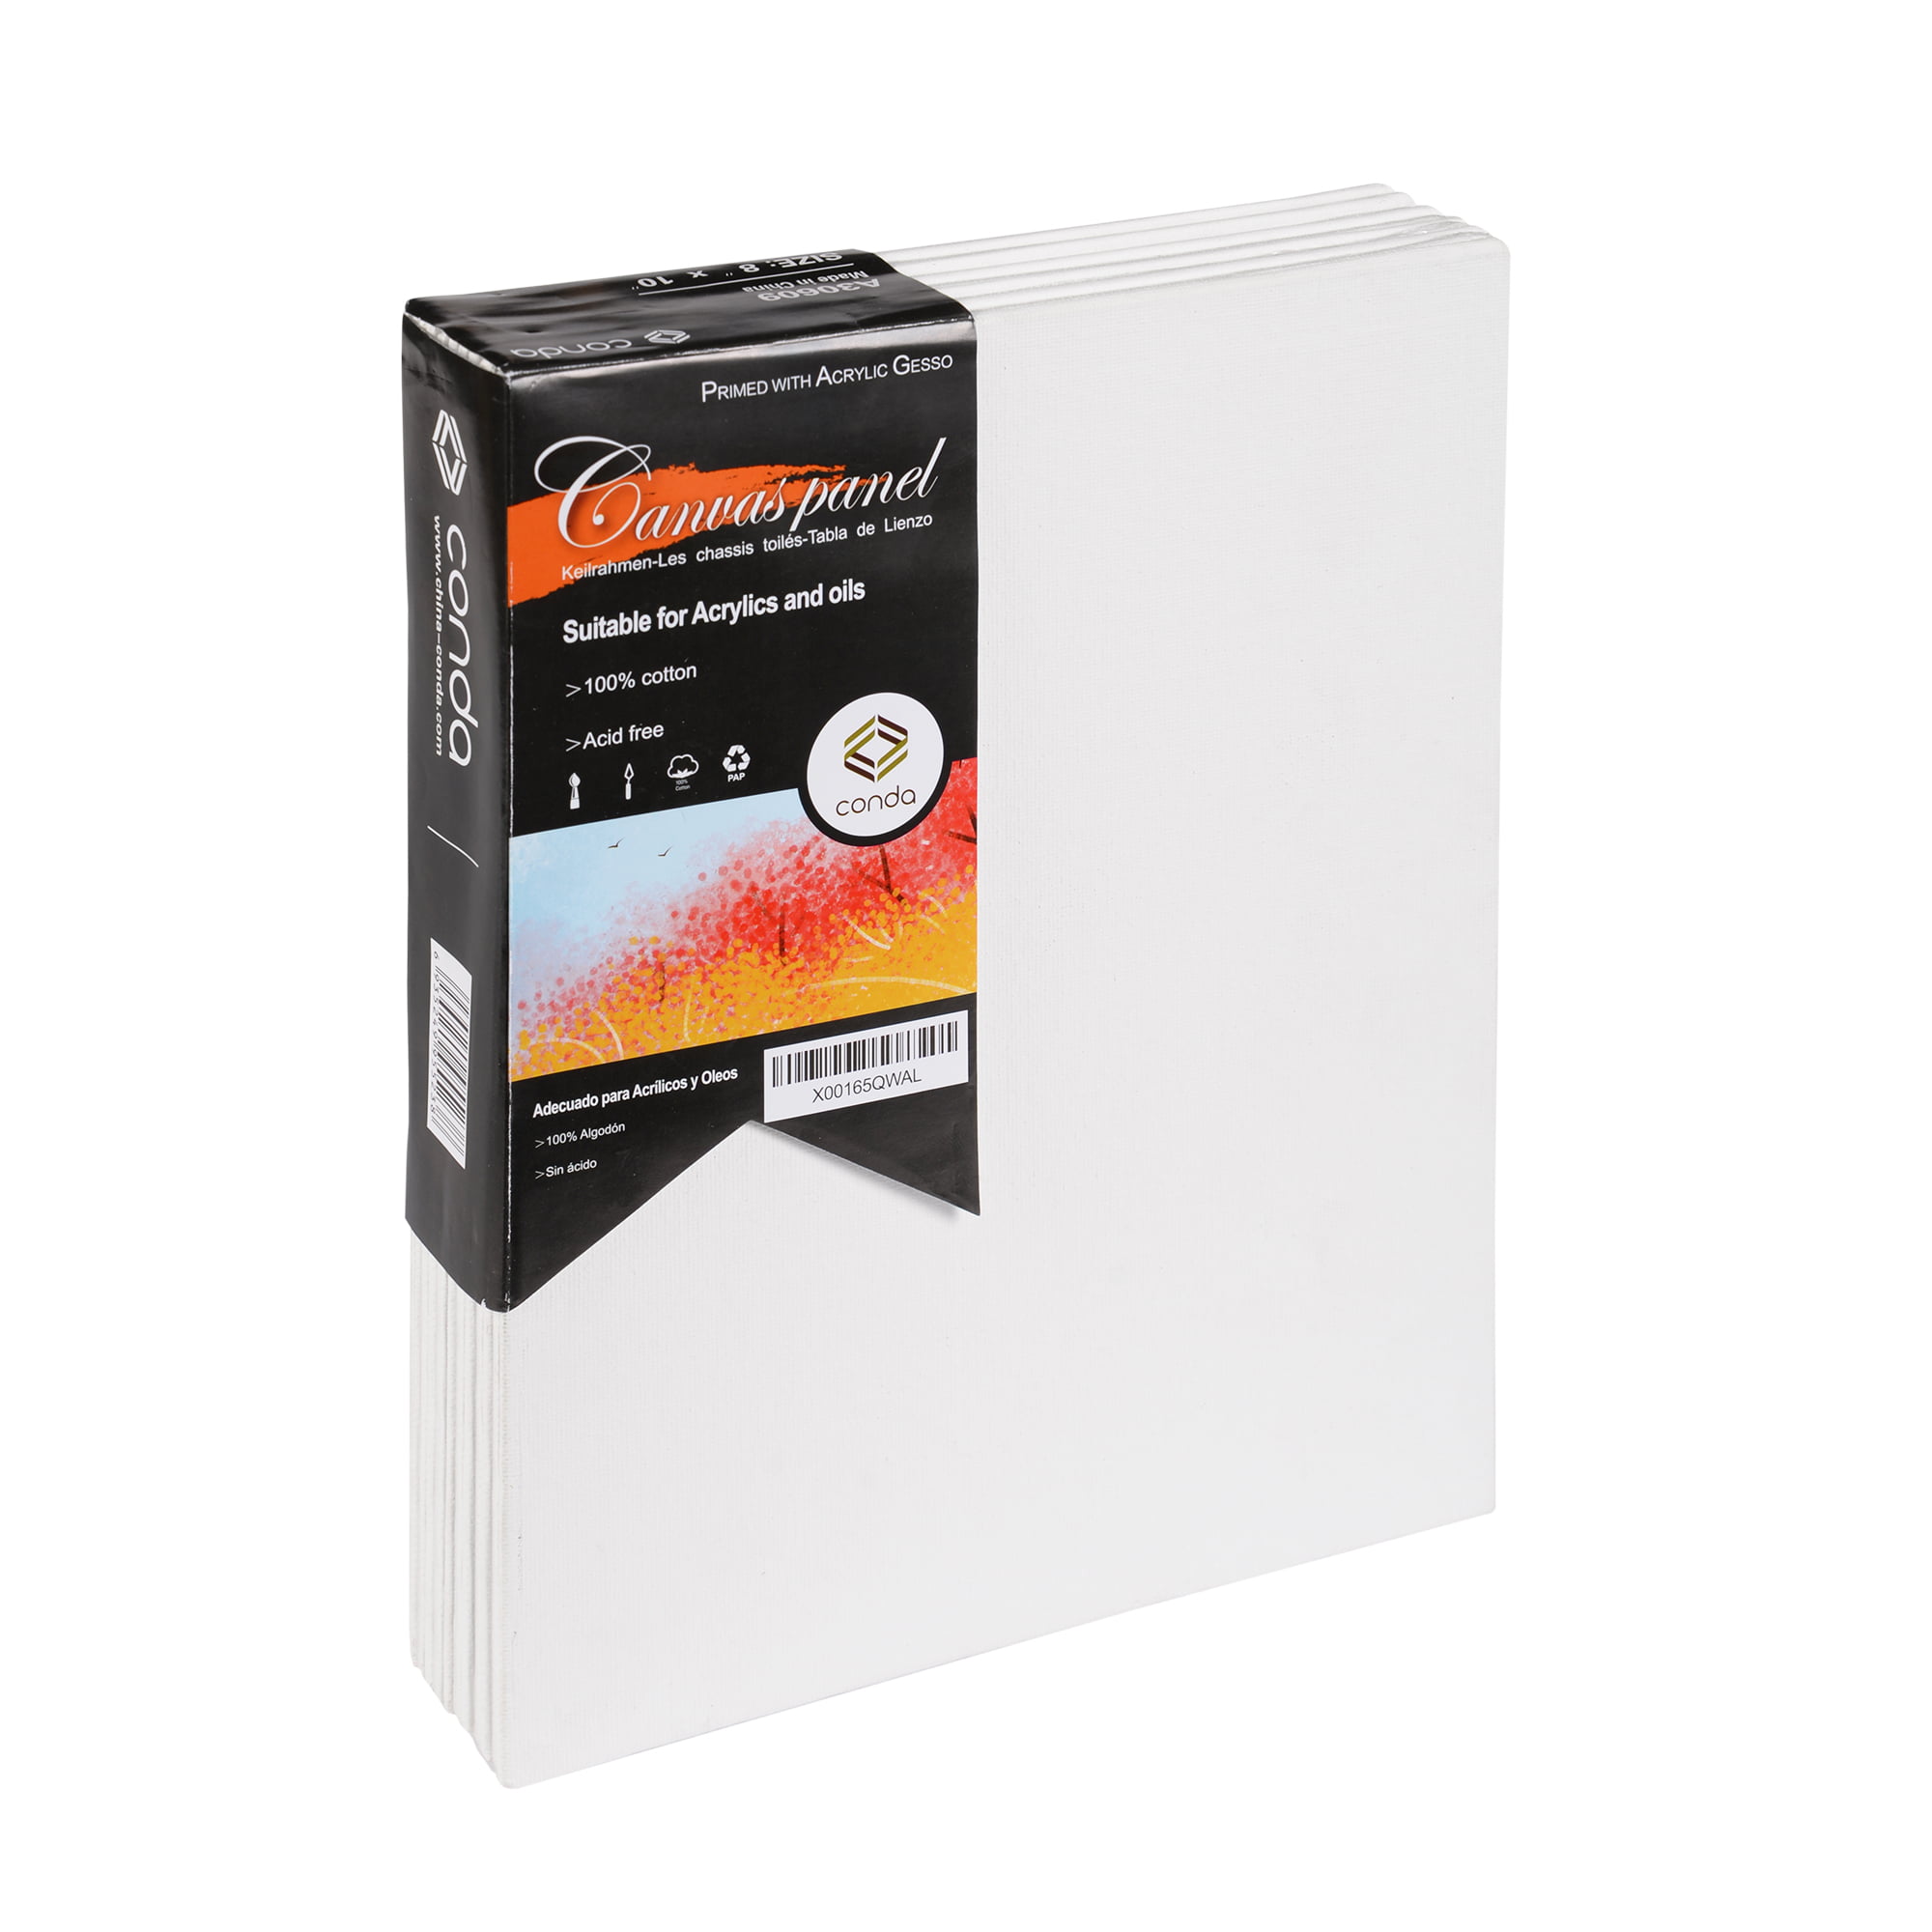 CONDA Canvas Panels 9 x 12 inch Pouring & Oil Painting Primed 100% Cotton Artist Quality Acid Free Canvas Board for Acrylic 24 Pack 